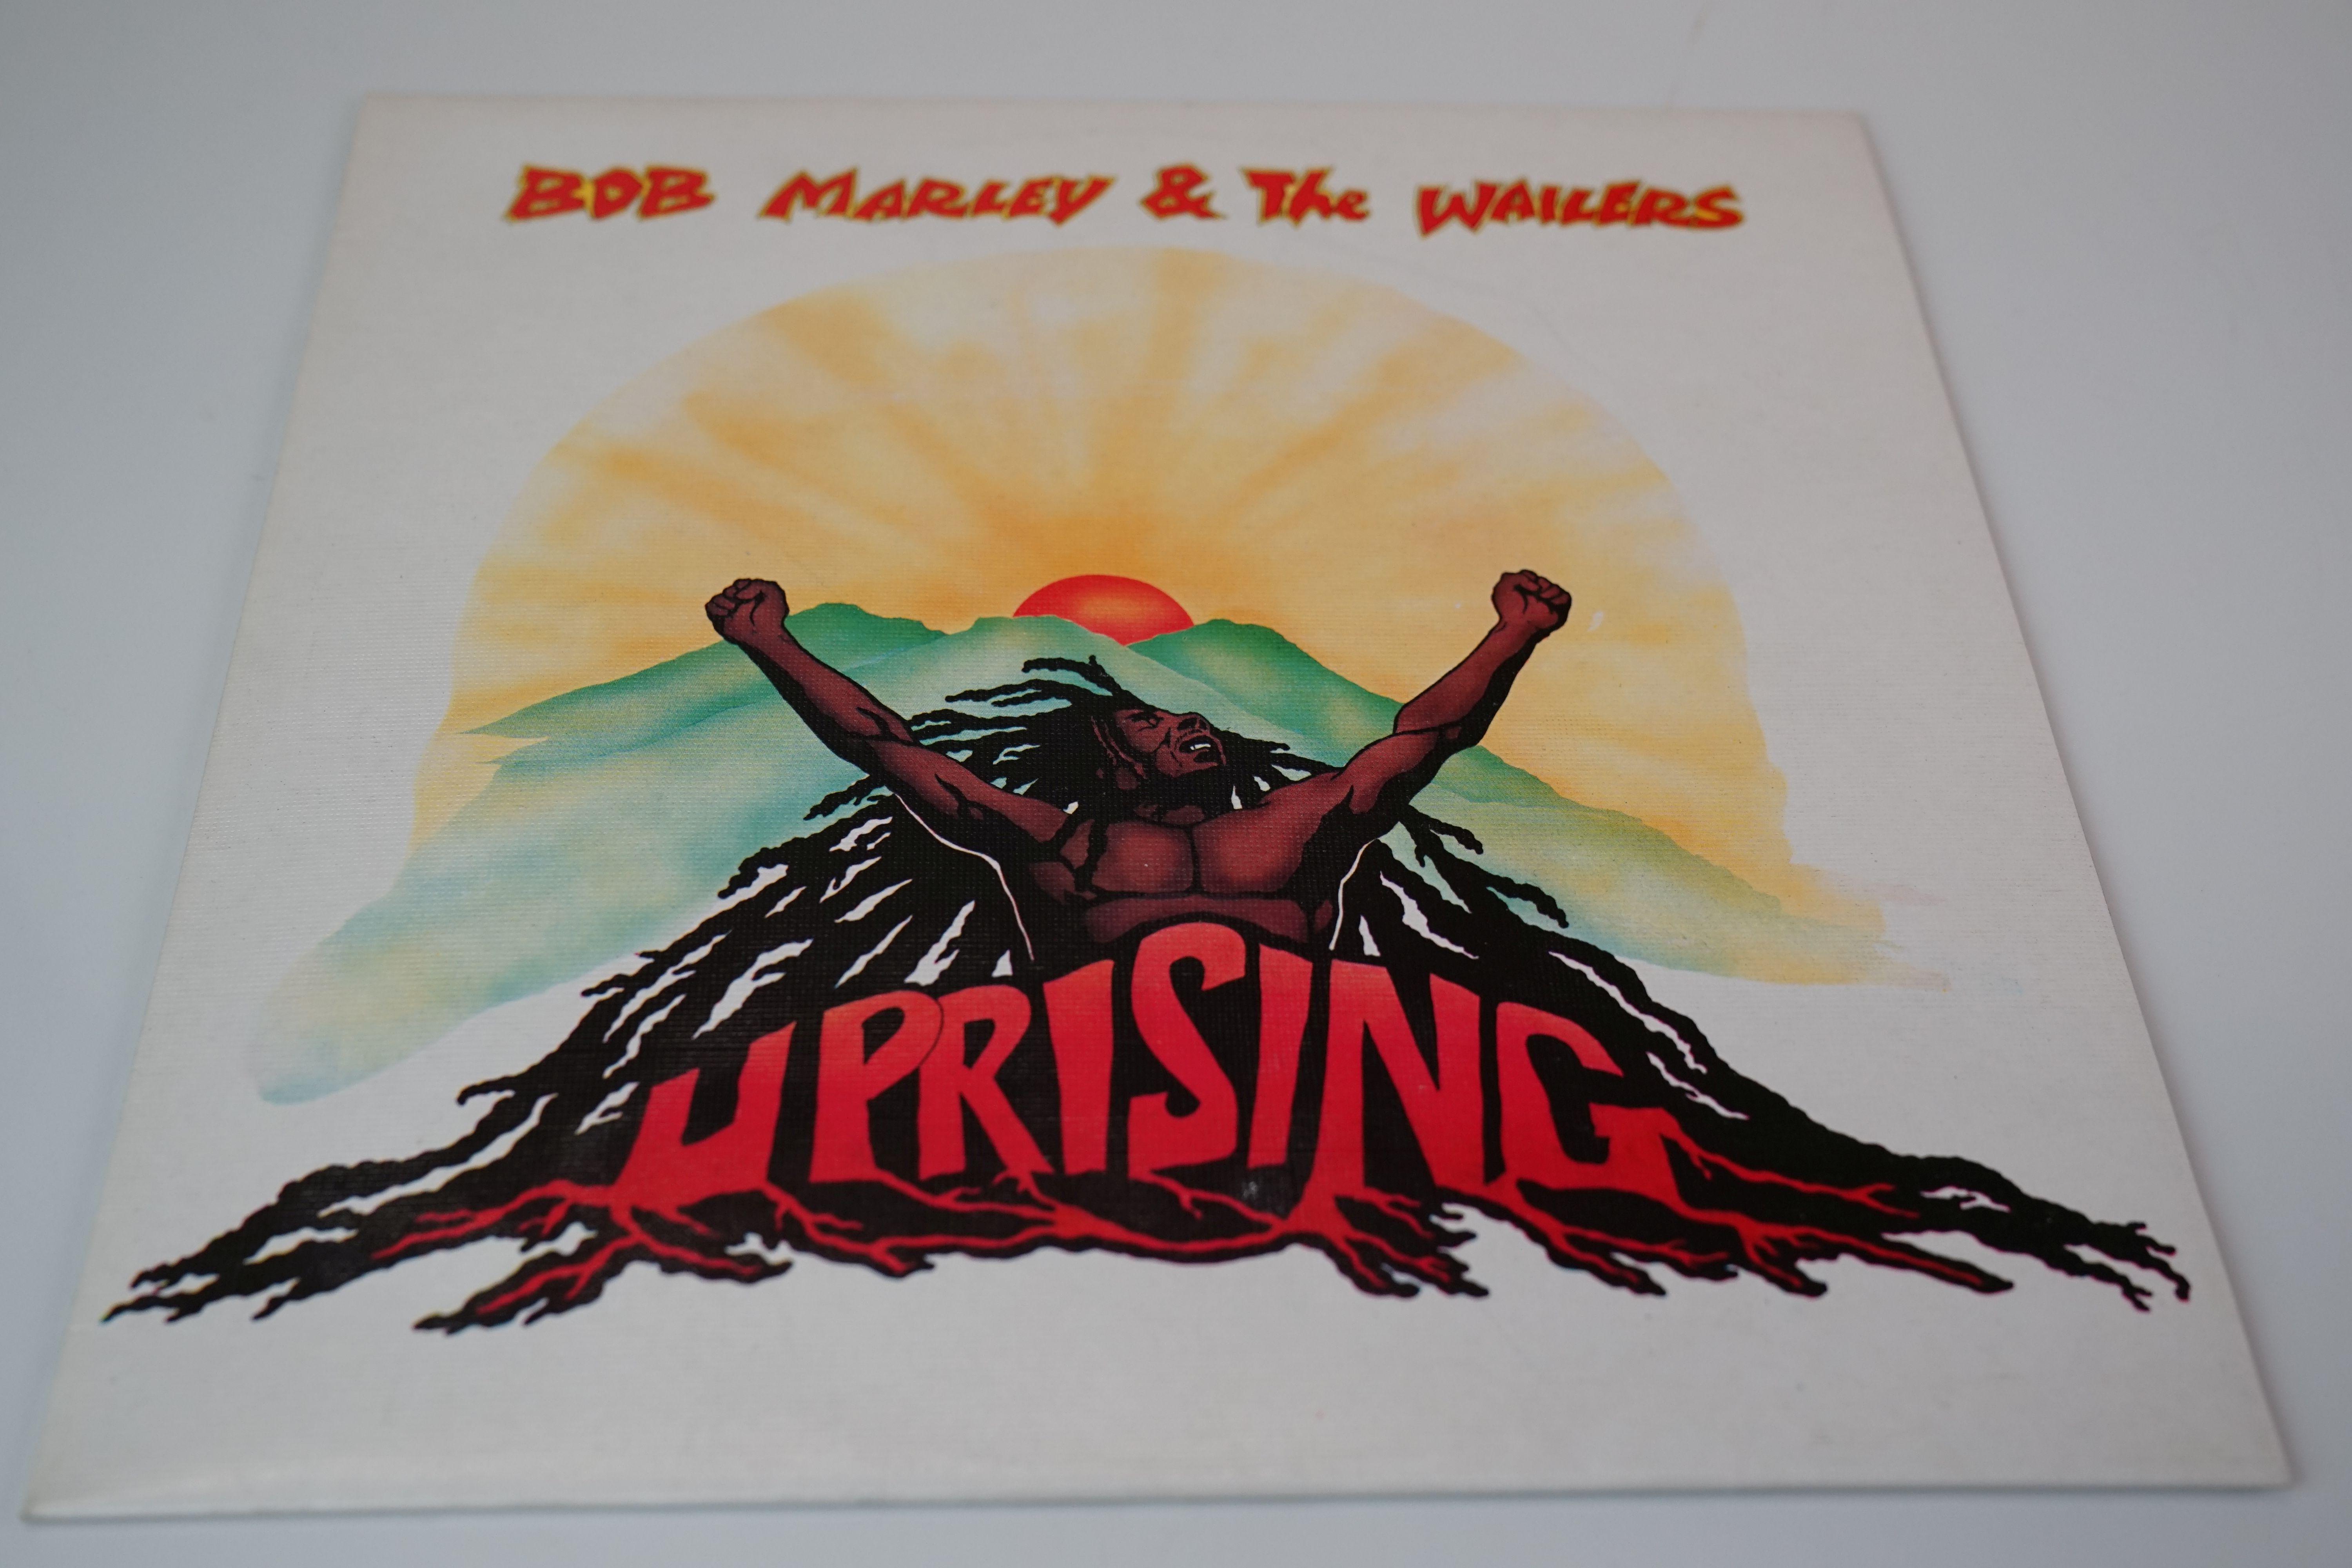 Vinyl - Small collection of 6 Bob Marley LPs to include Uprising, A Friction Herbsman, Natty - Image 8 of 39